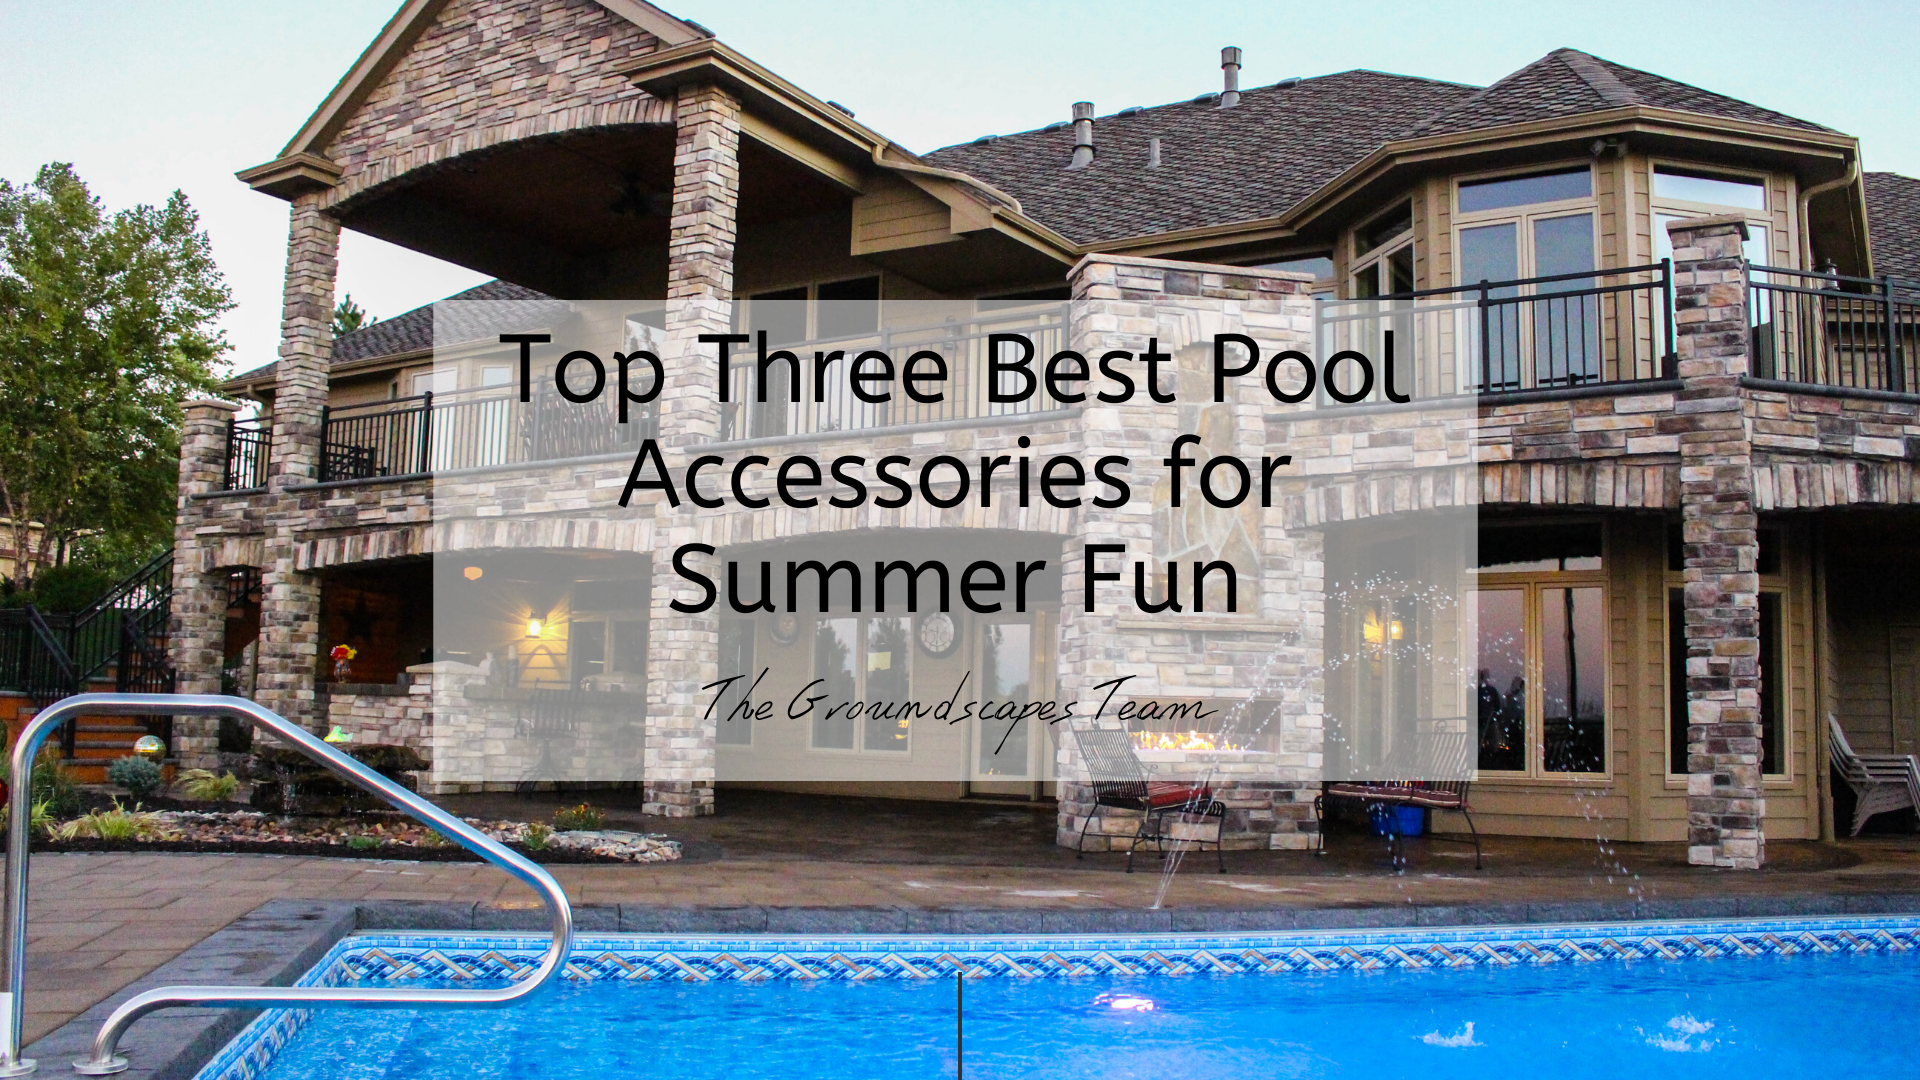 Groundscapes: Top Three Best Pool Accessories for Summer Fun